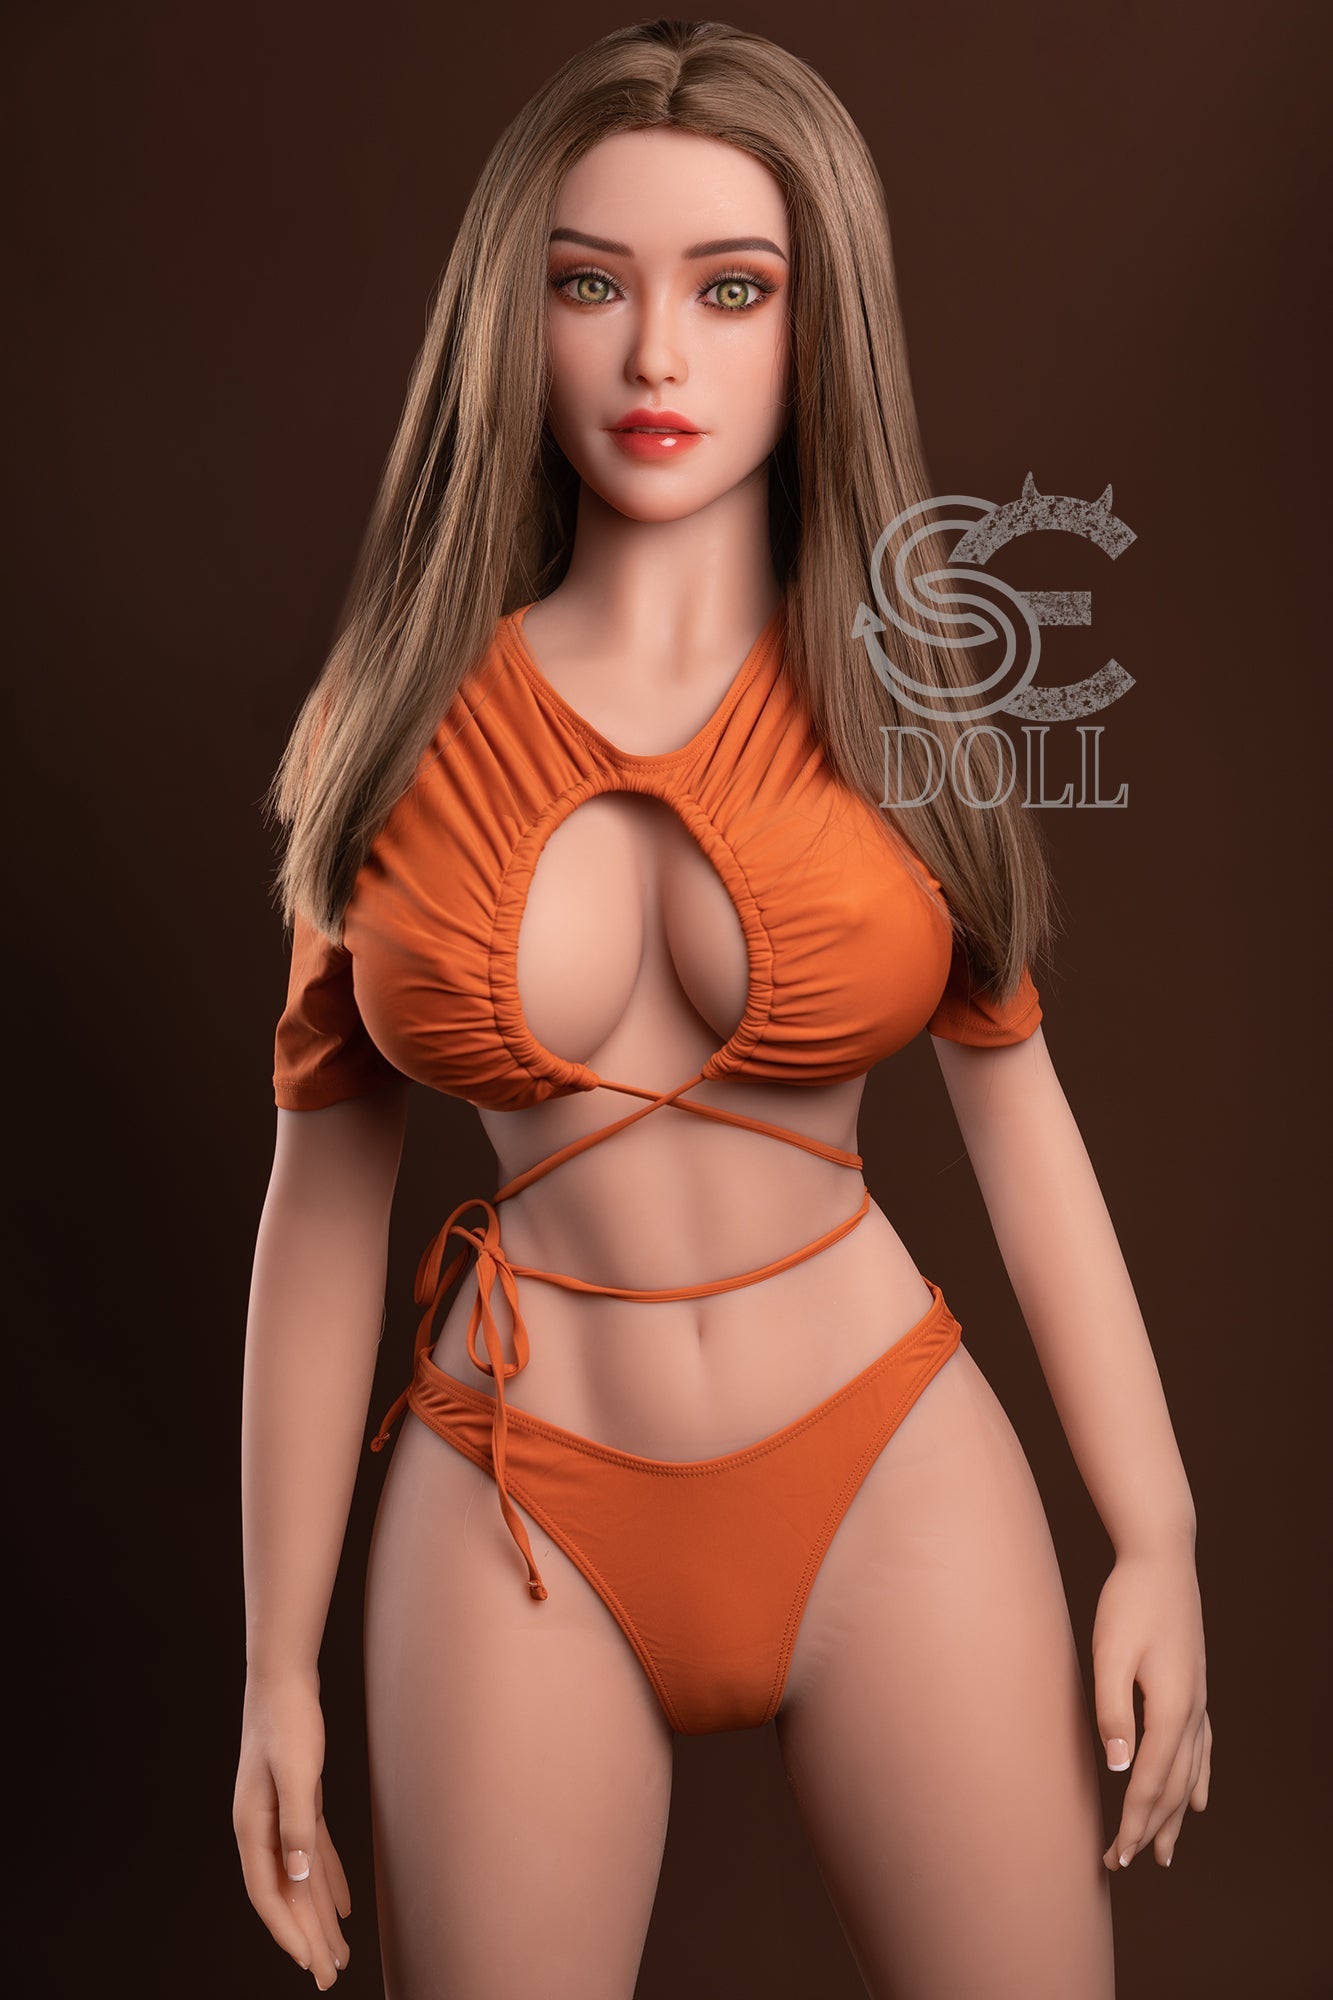 SEDOLL 157 cm H TPE - Vicky | Buy Sex Dolls at DOLLS ACTUALLY